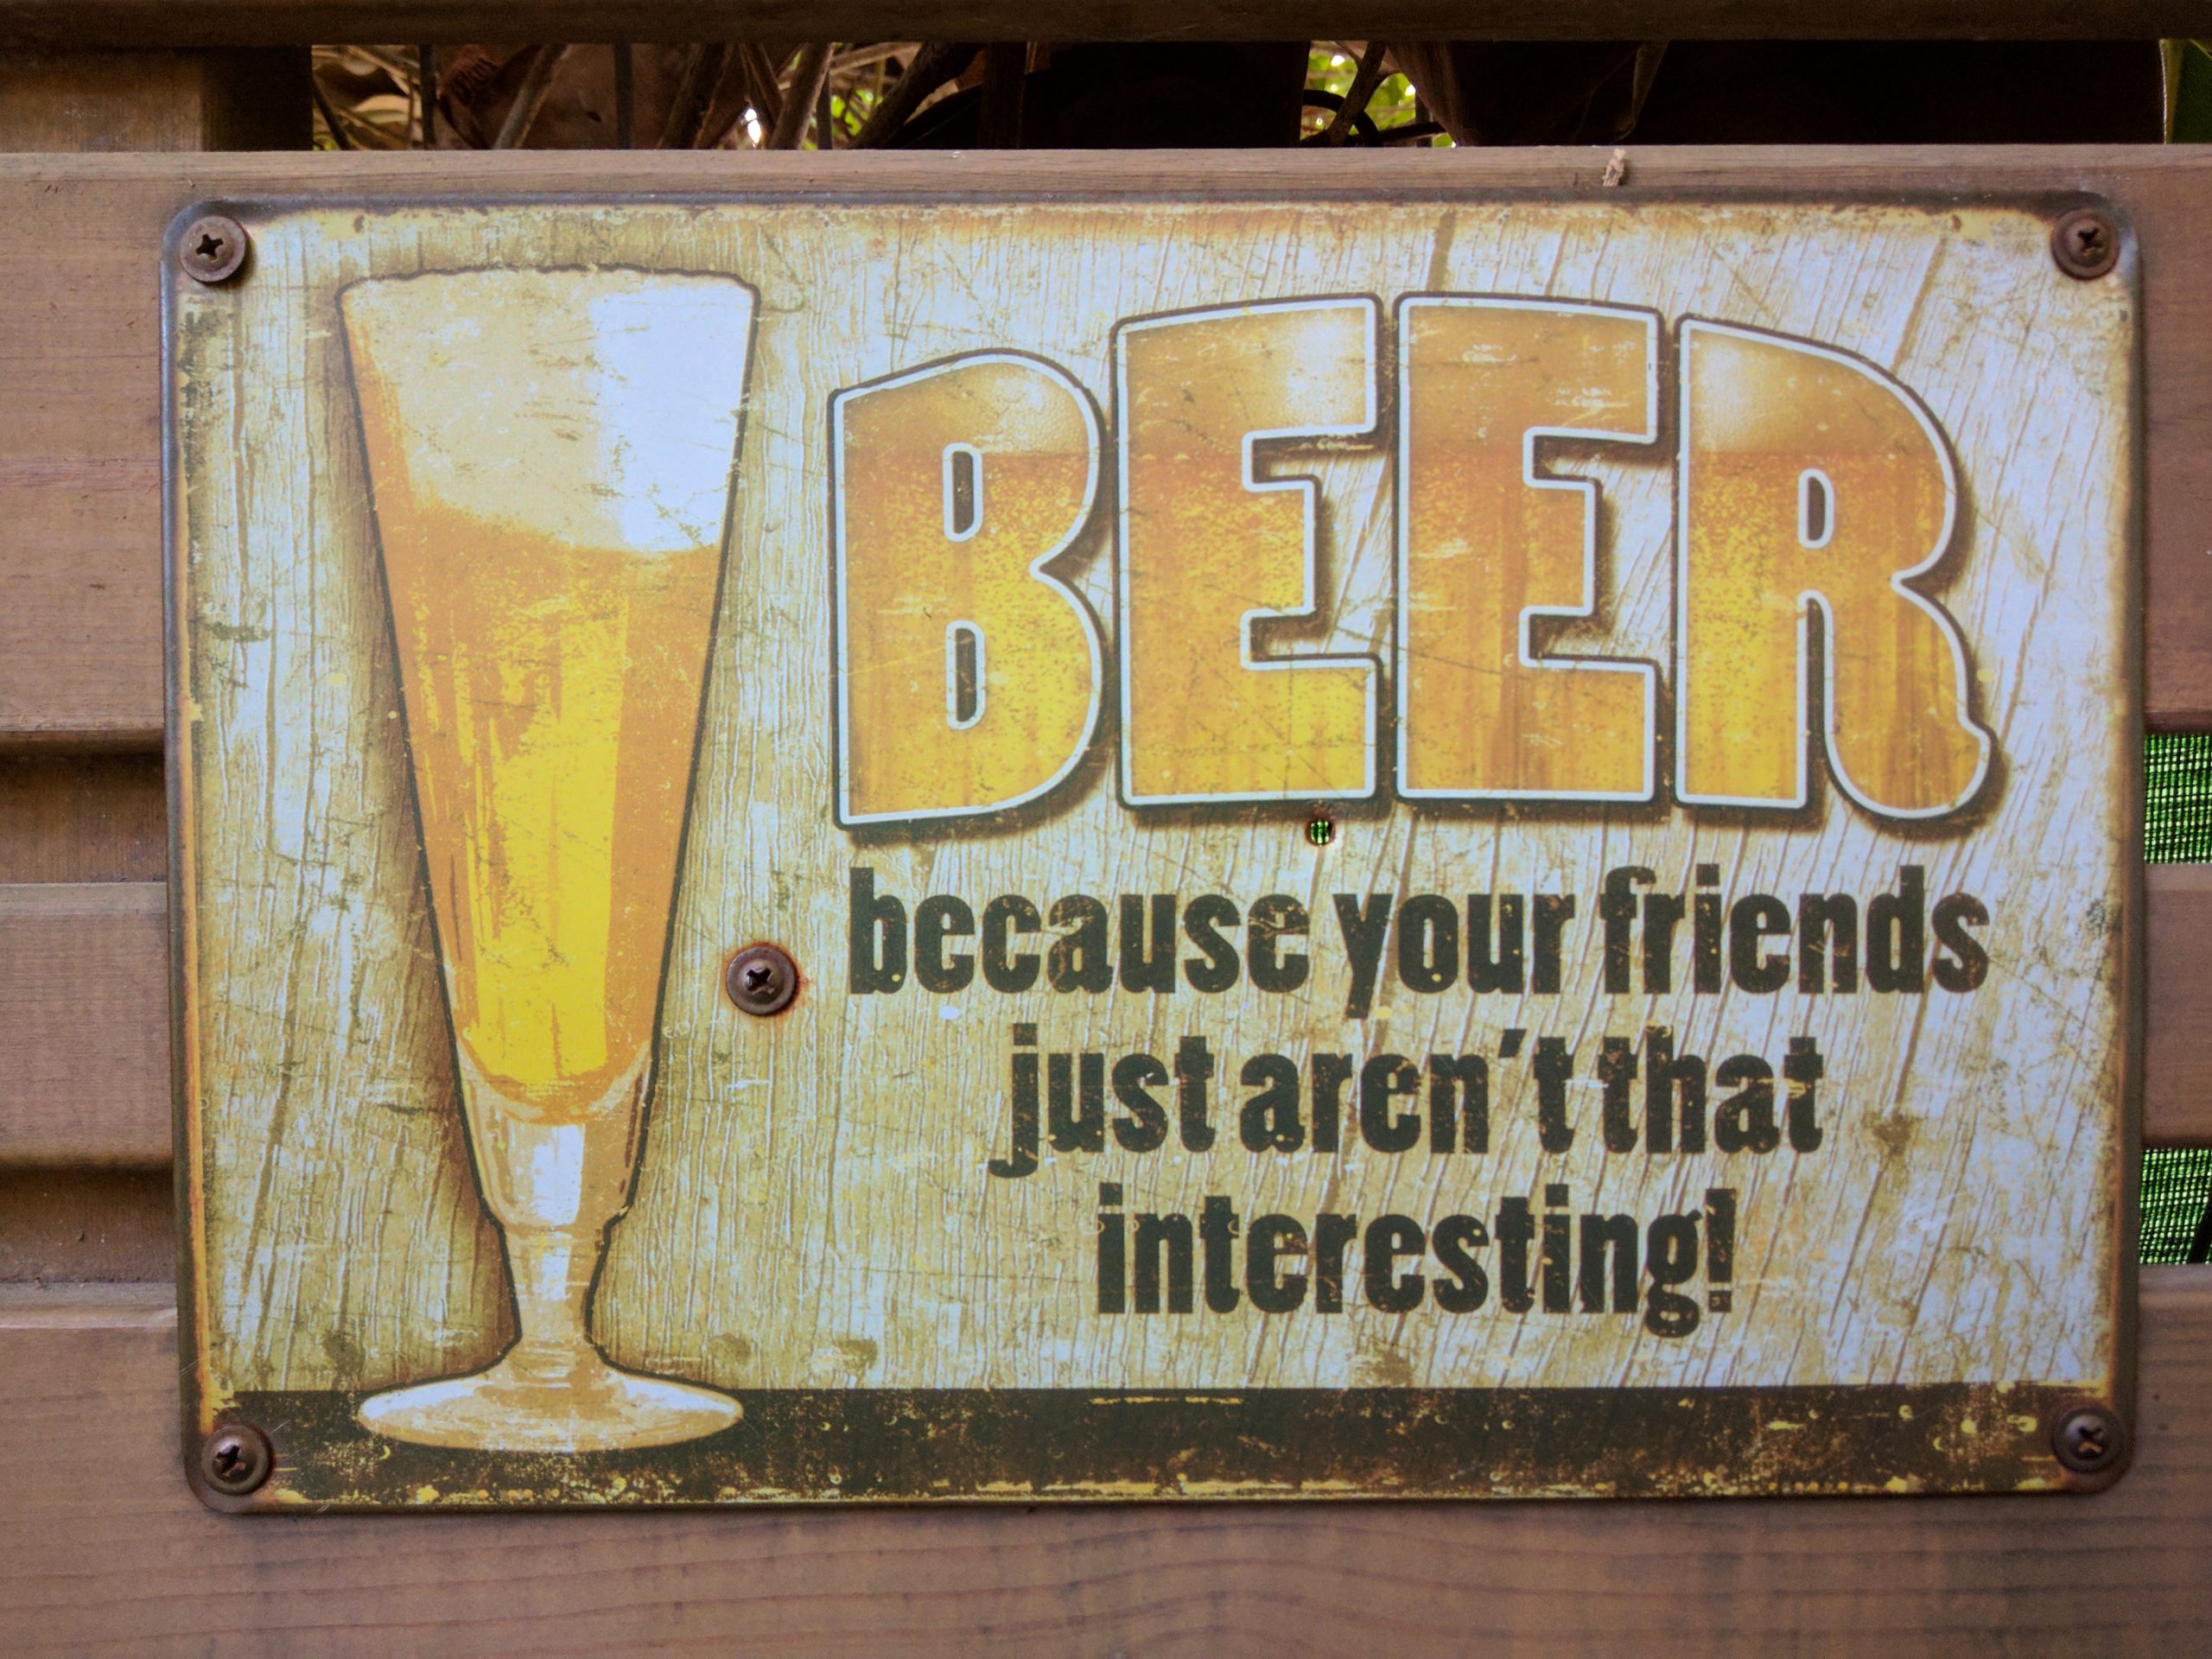 PhotoMeme.org: Beer, because your friends just aren't that interesting!